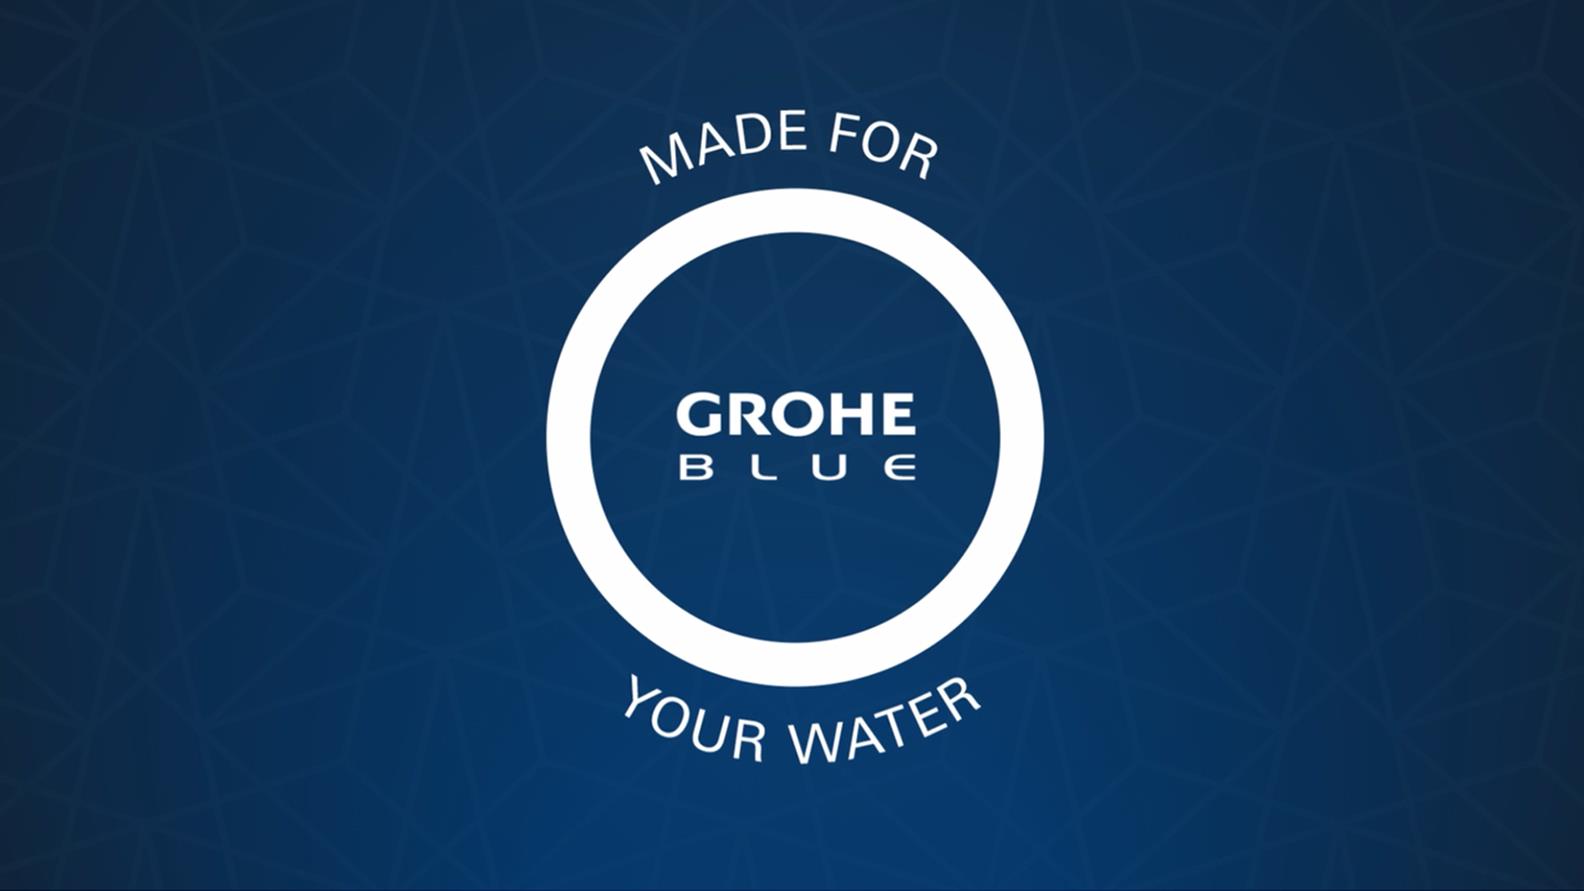 GROHE Blue Carbon Footprint